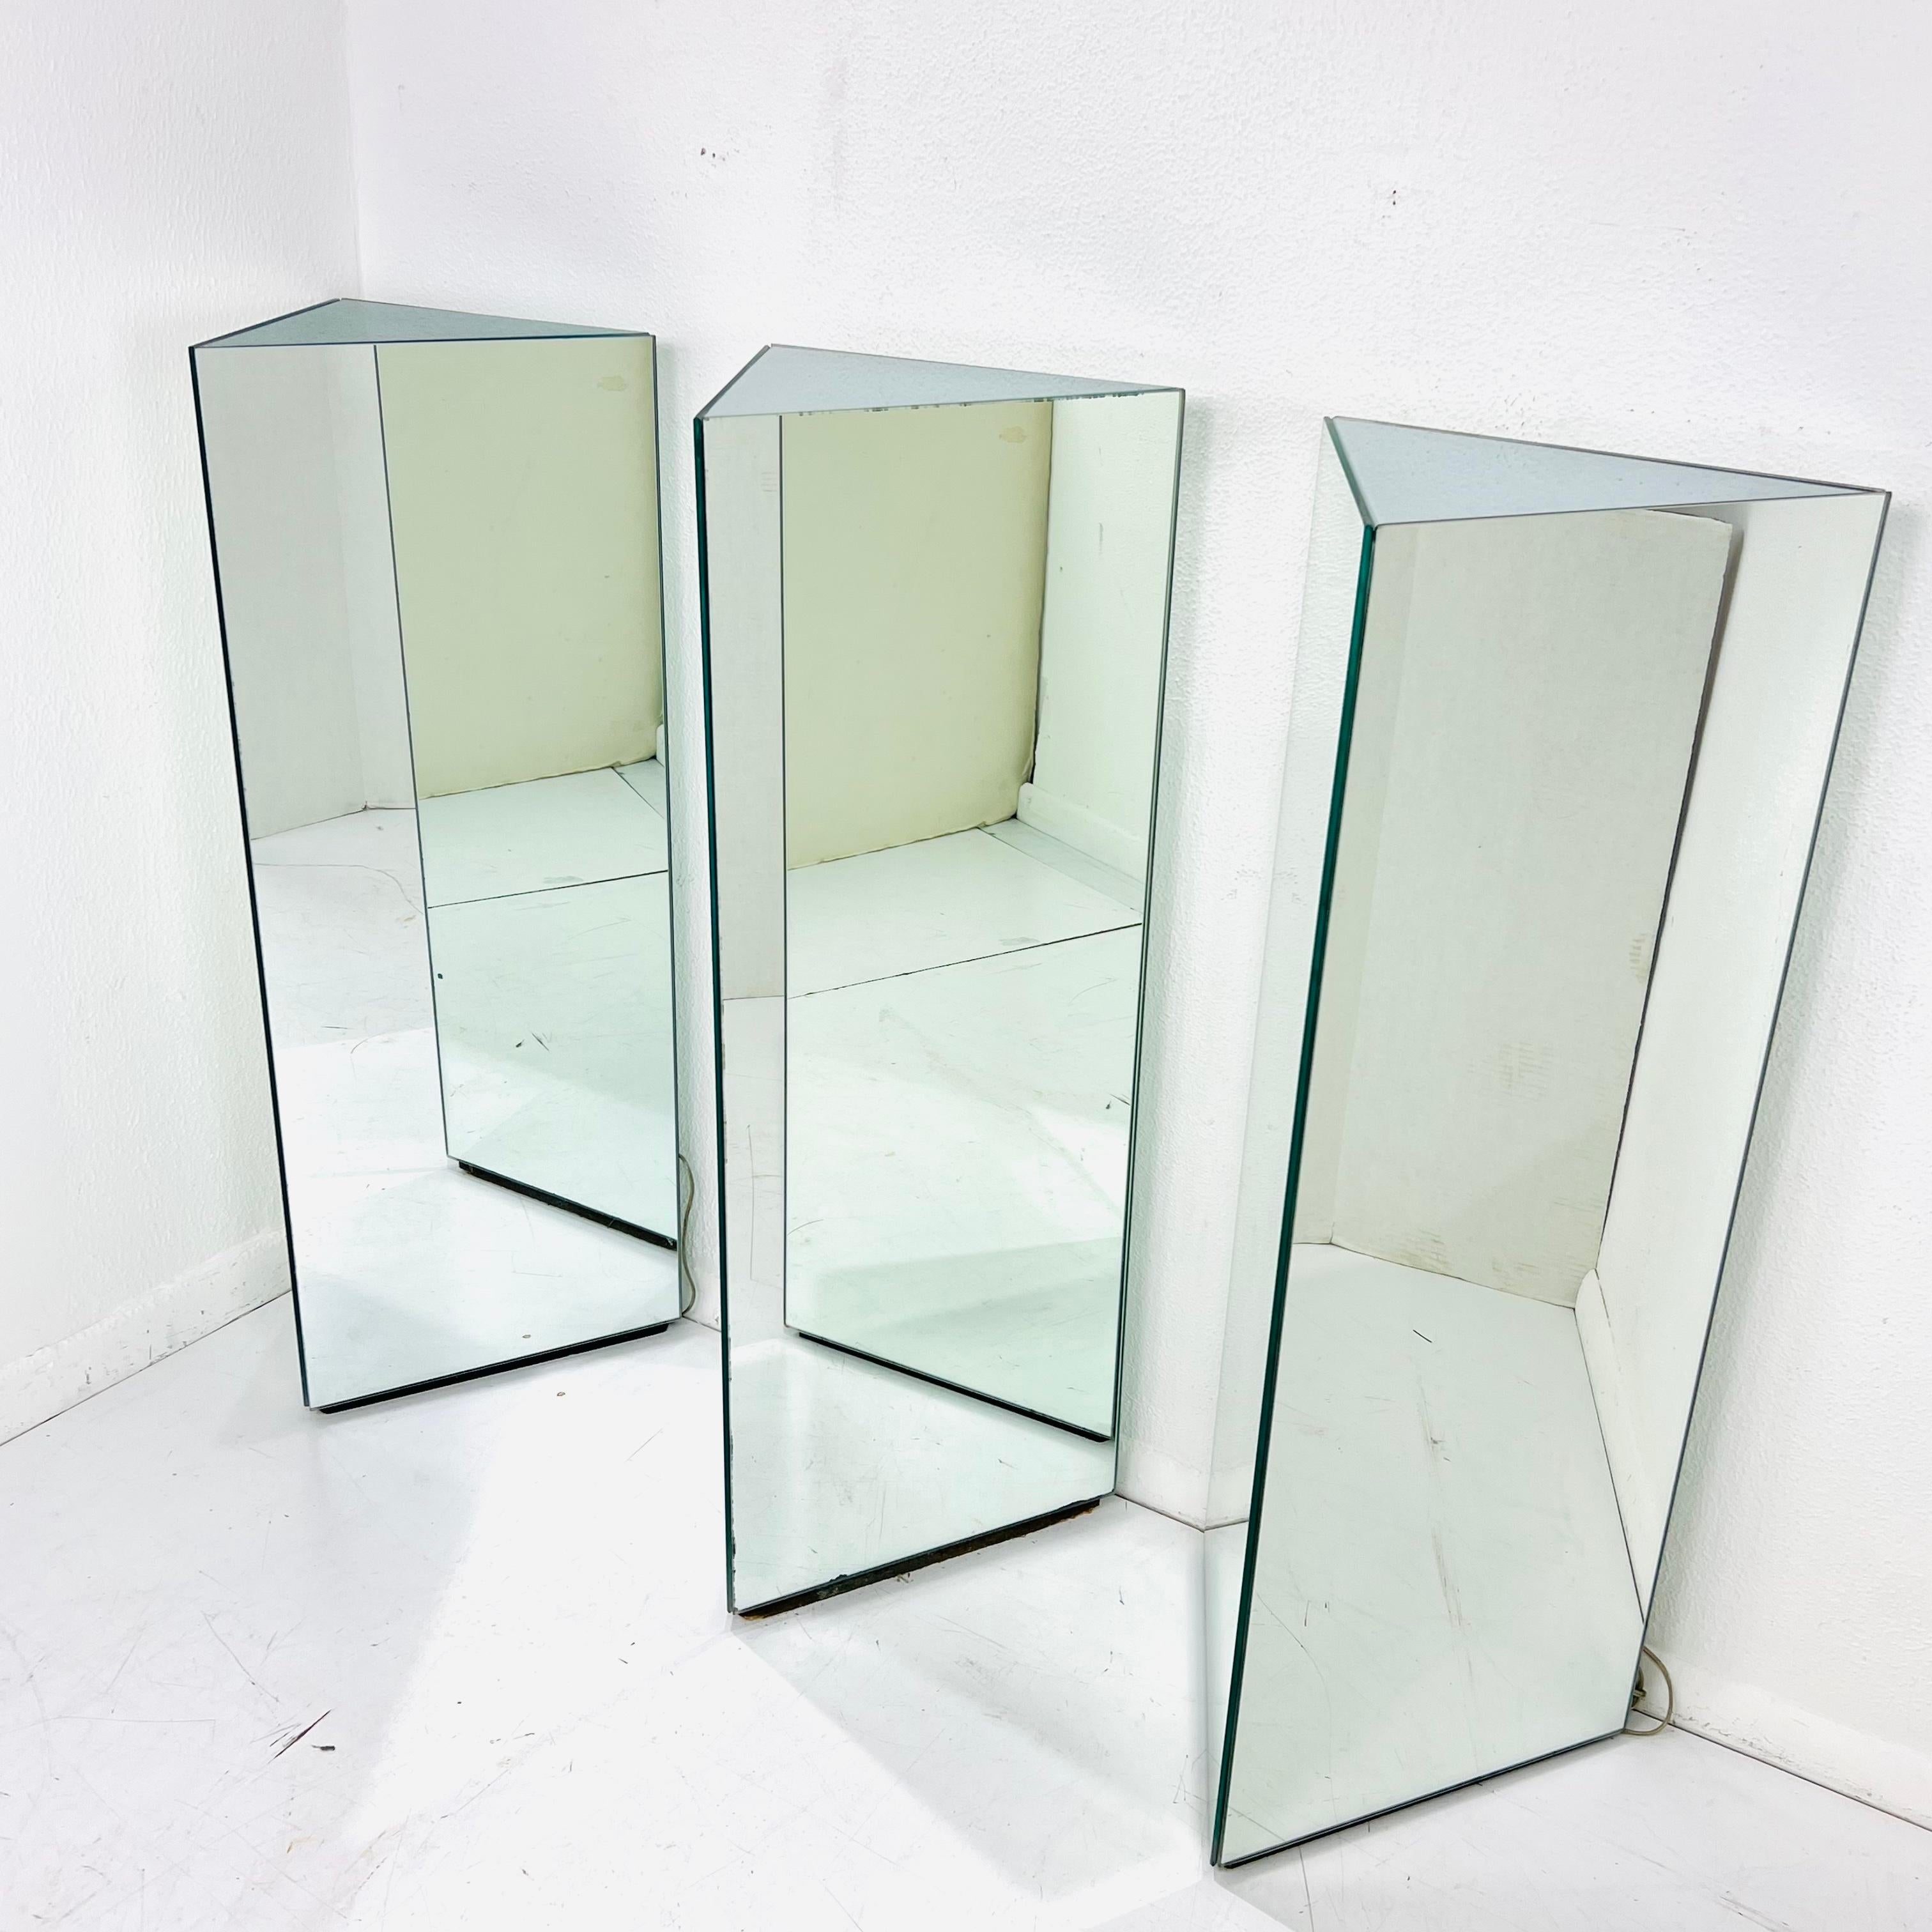 Custom made 1980s lighted triangular mirrored pedestals. Each mirrored side measures 16